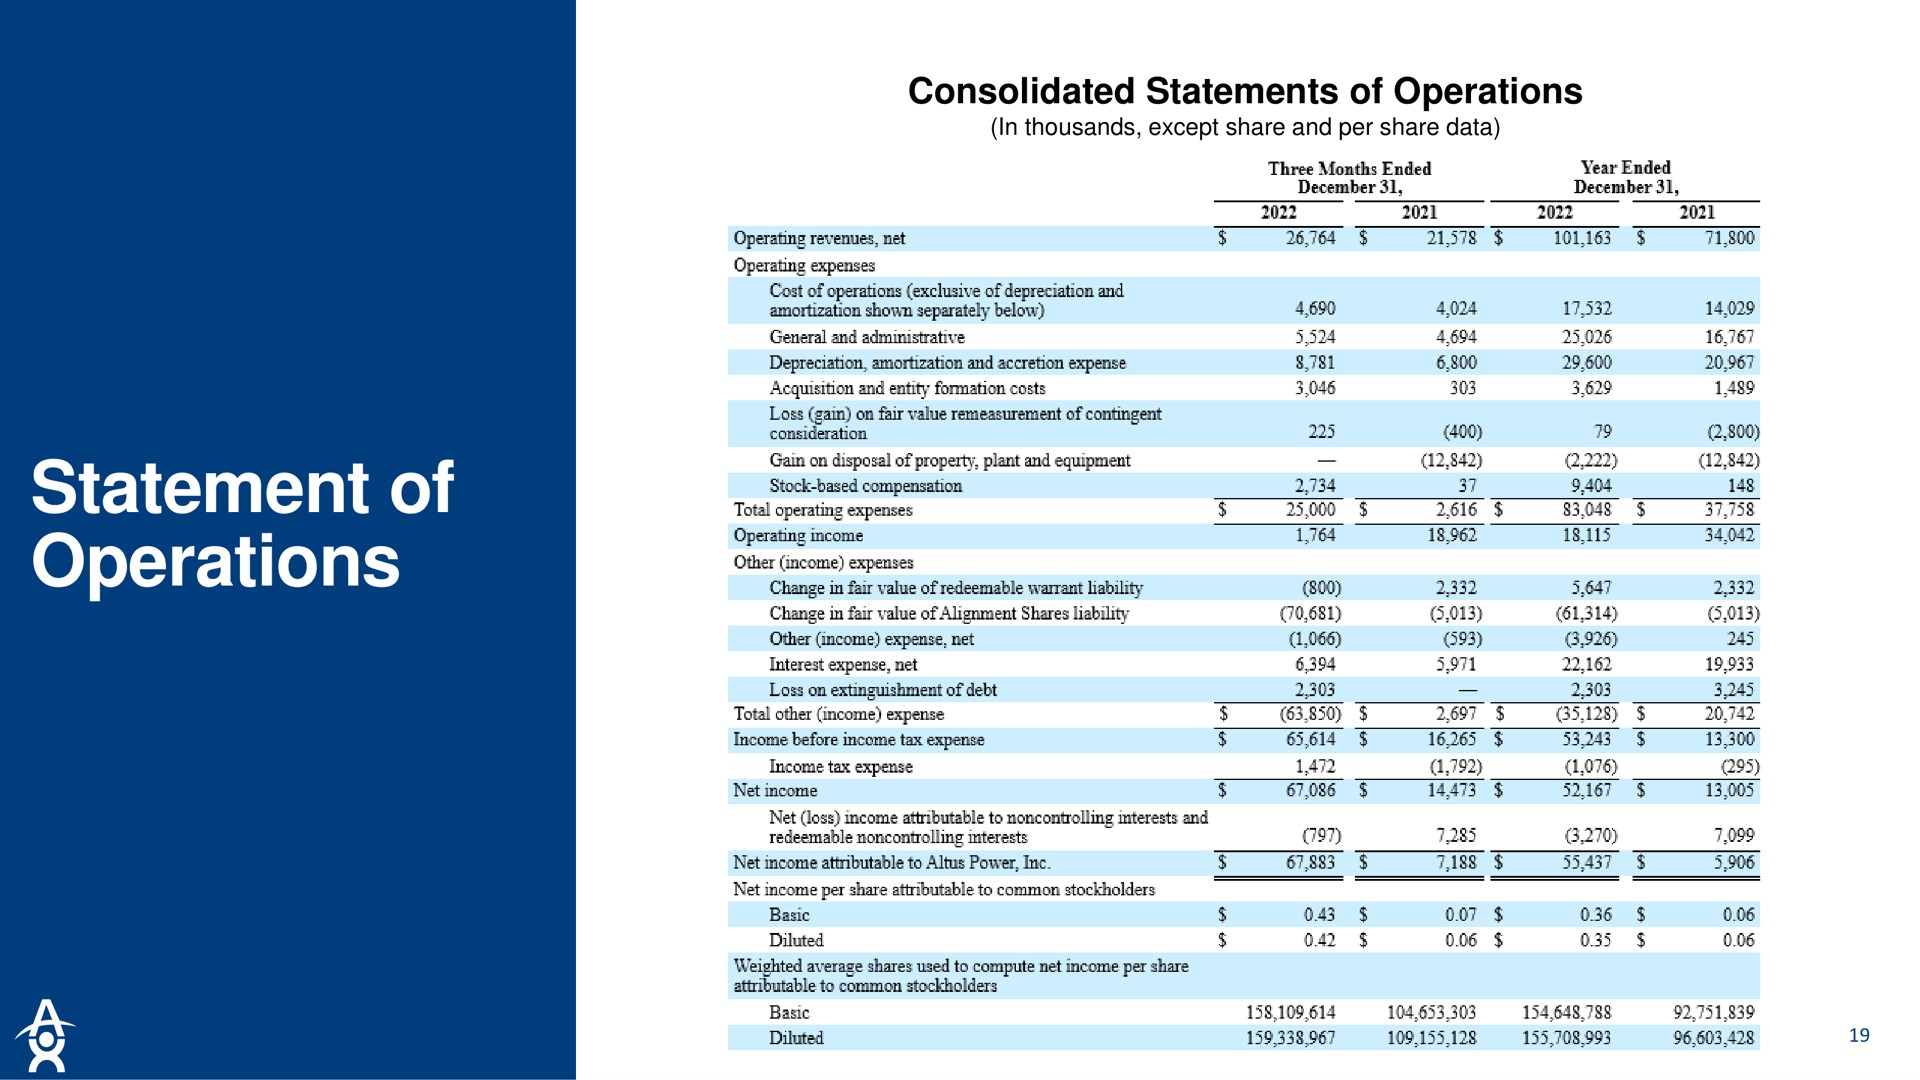 statement of operations consolidated statements | Altus Power